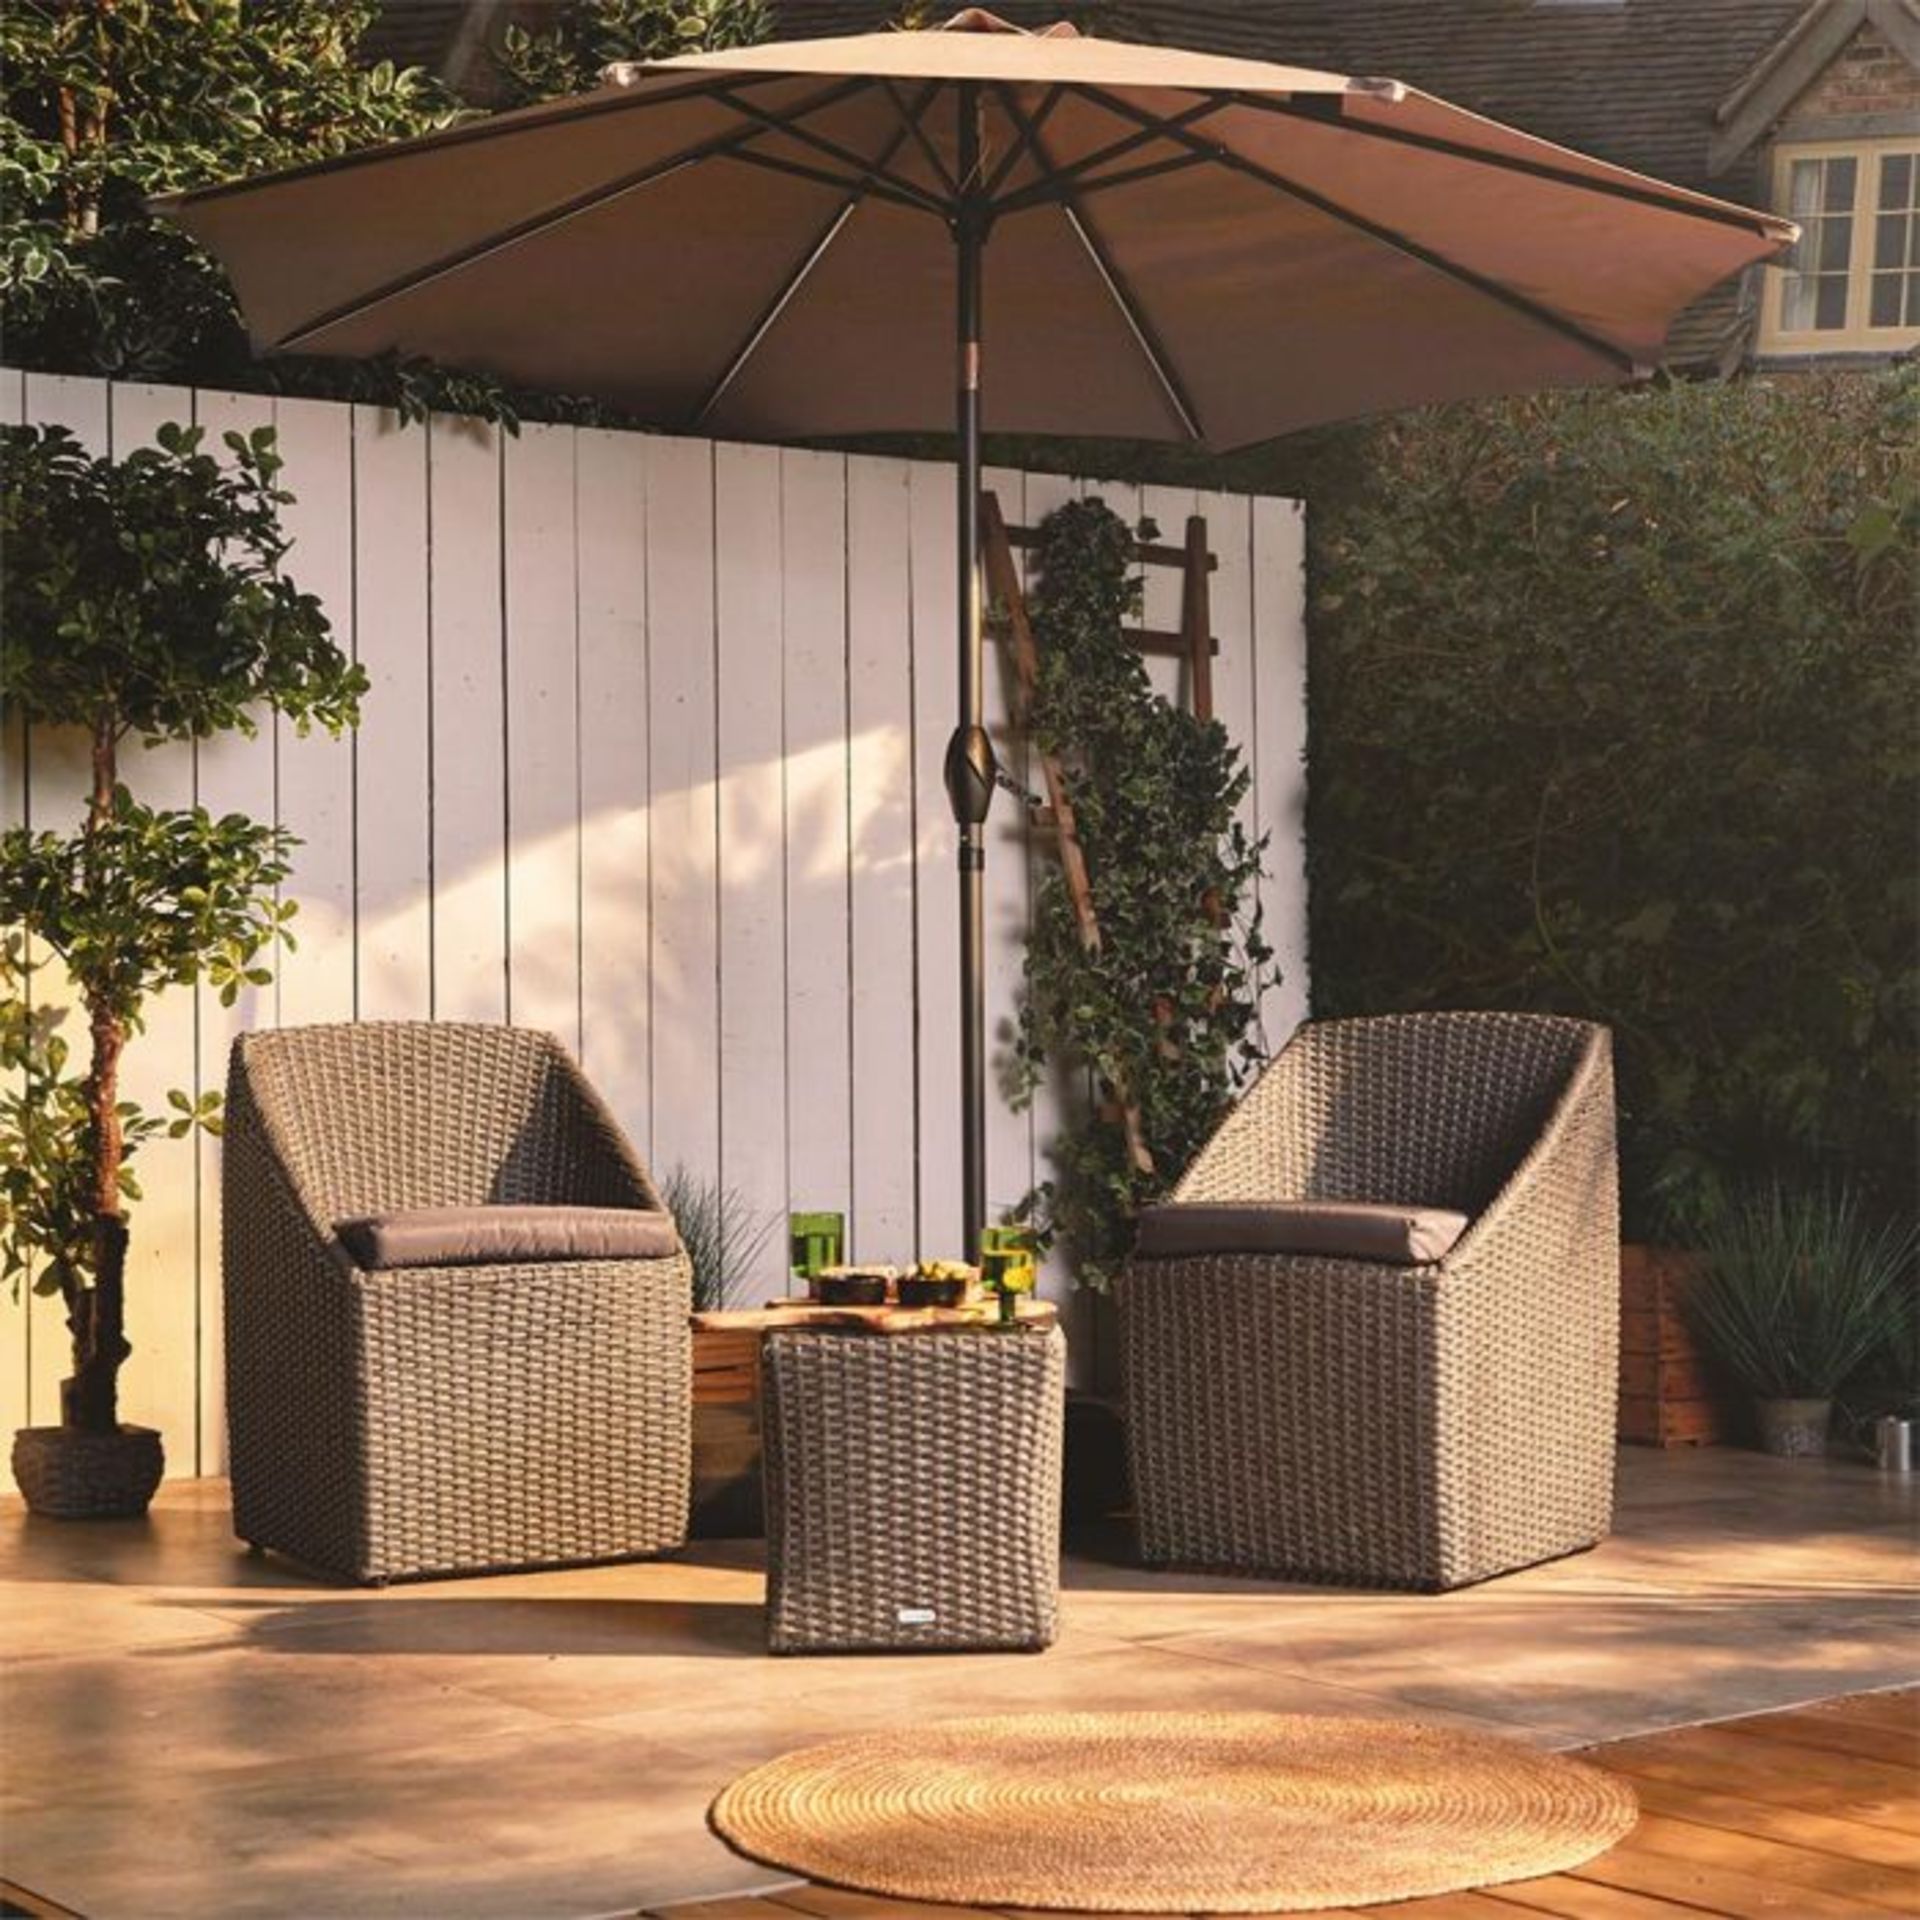 Luxury Rattan Bistro Set. Whether you have a large garden or a small balcony, this bistro set is the - Image 2 of 3